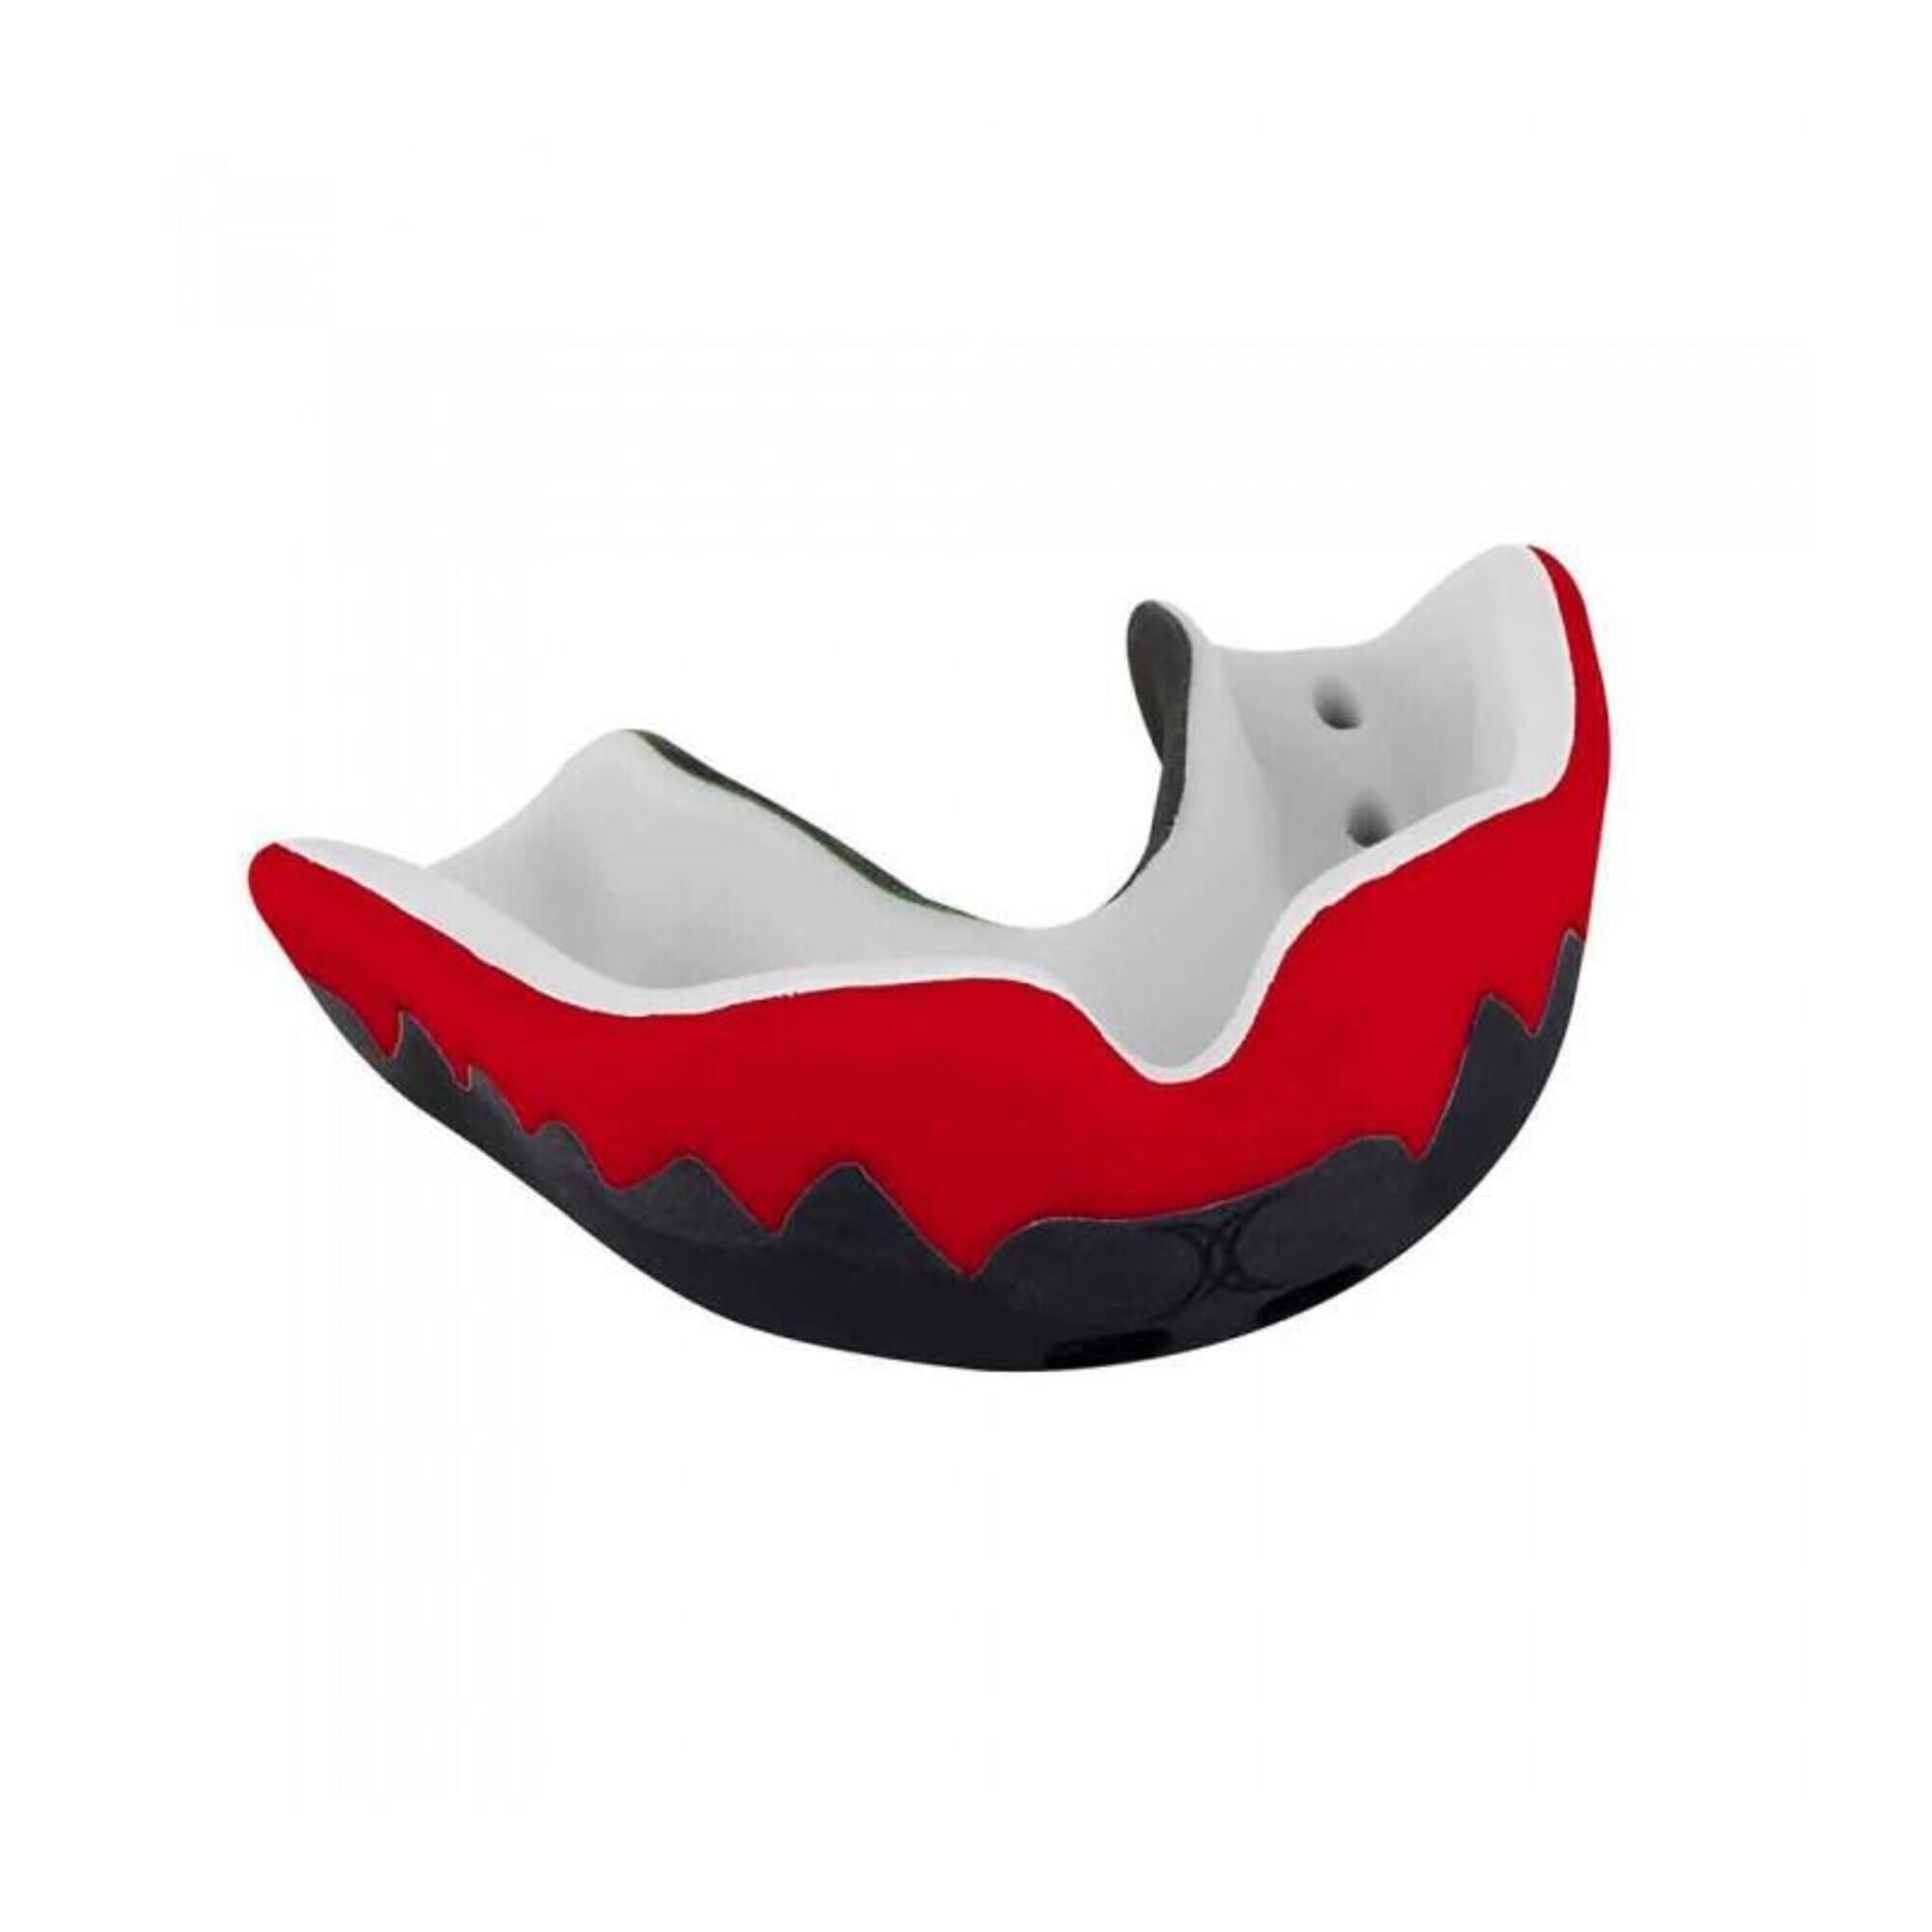 GILBERT Viper Pro3 Mouthguard - Black / Red - Adult